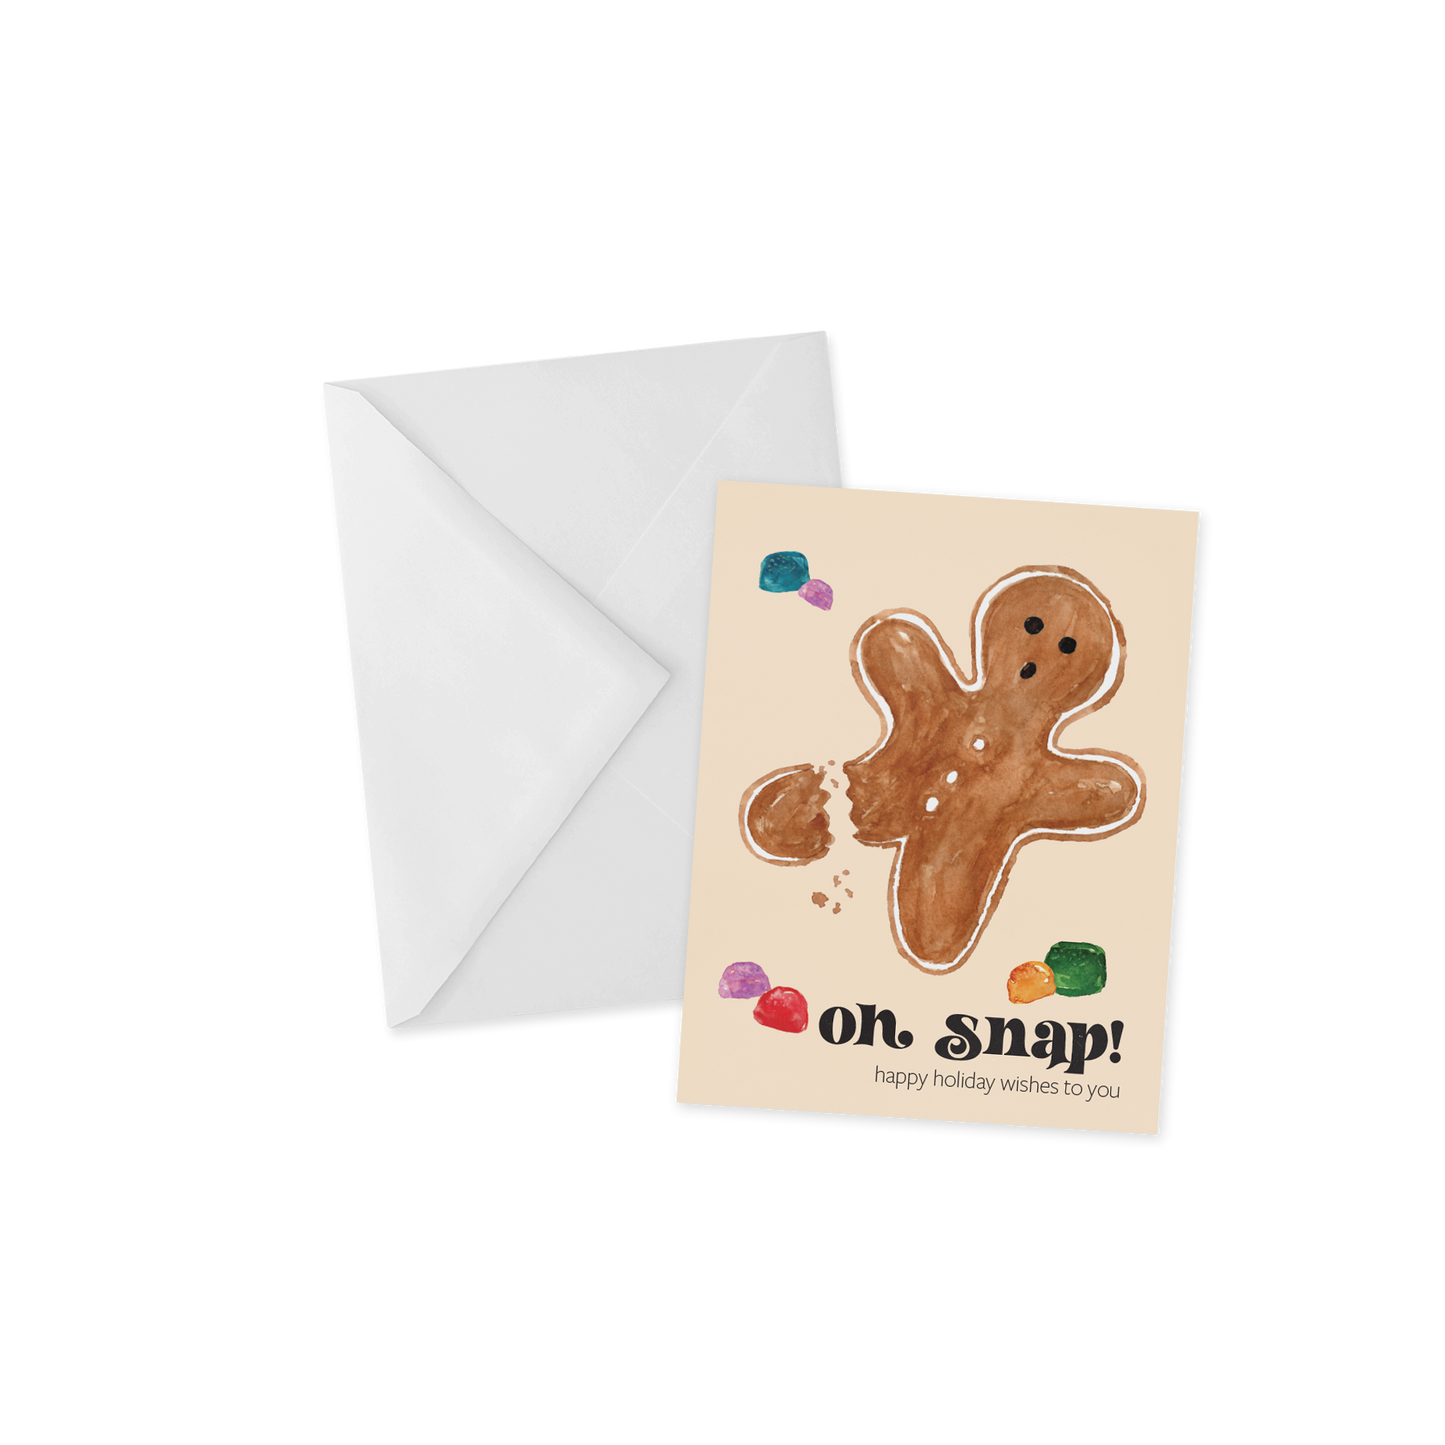 Oh Snap! Funny Gingerbread Man Christmas Card